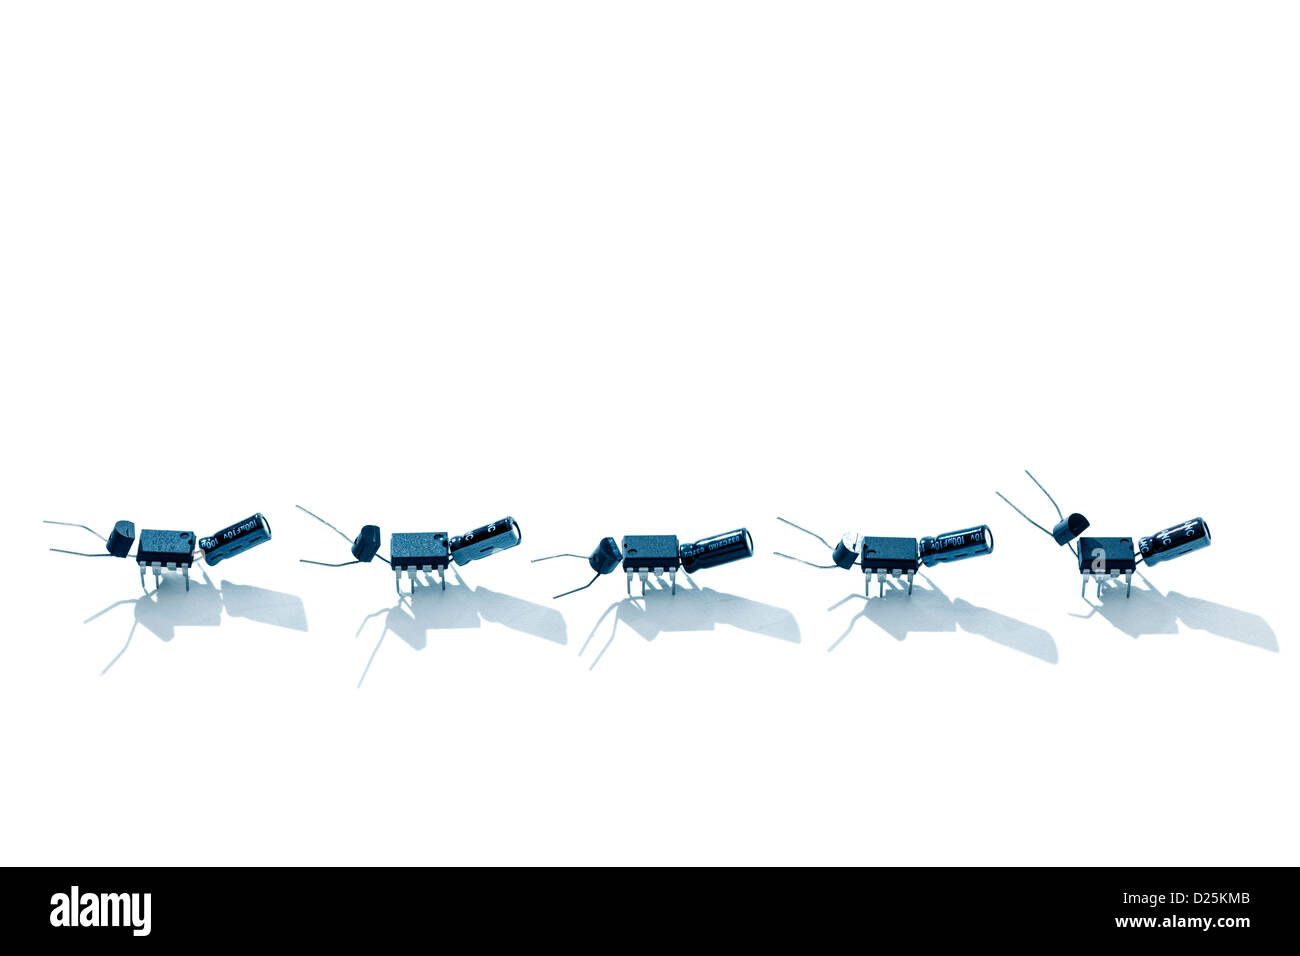 Ants / bugs made out of microchips and other electronic parts Stock Photo